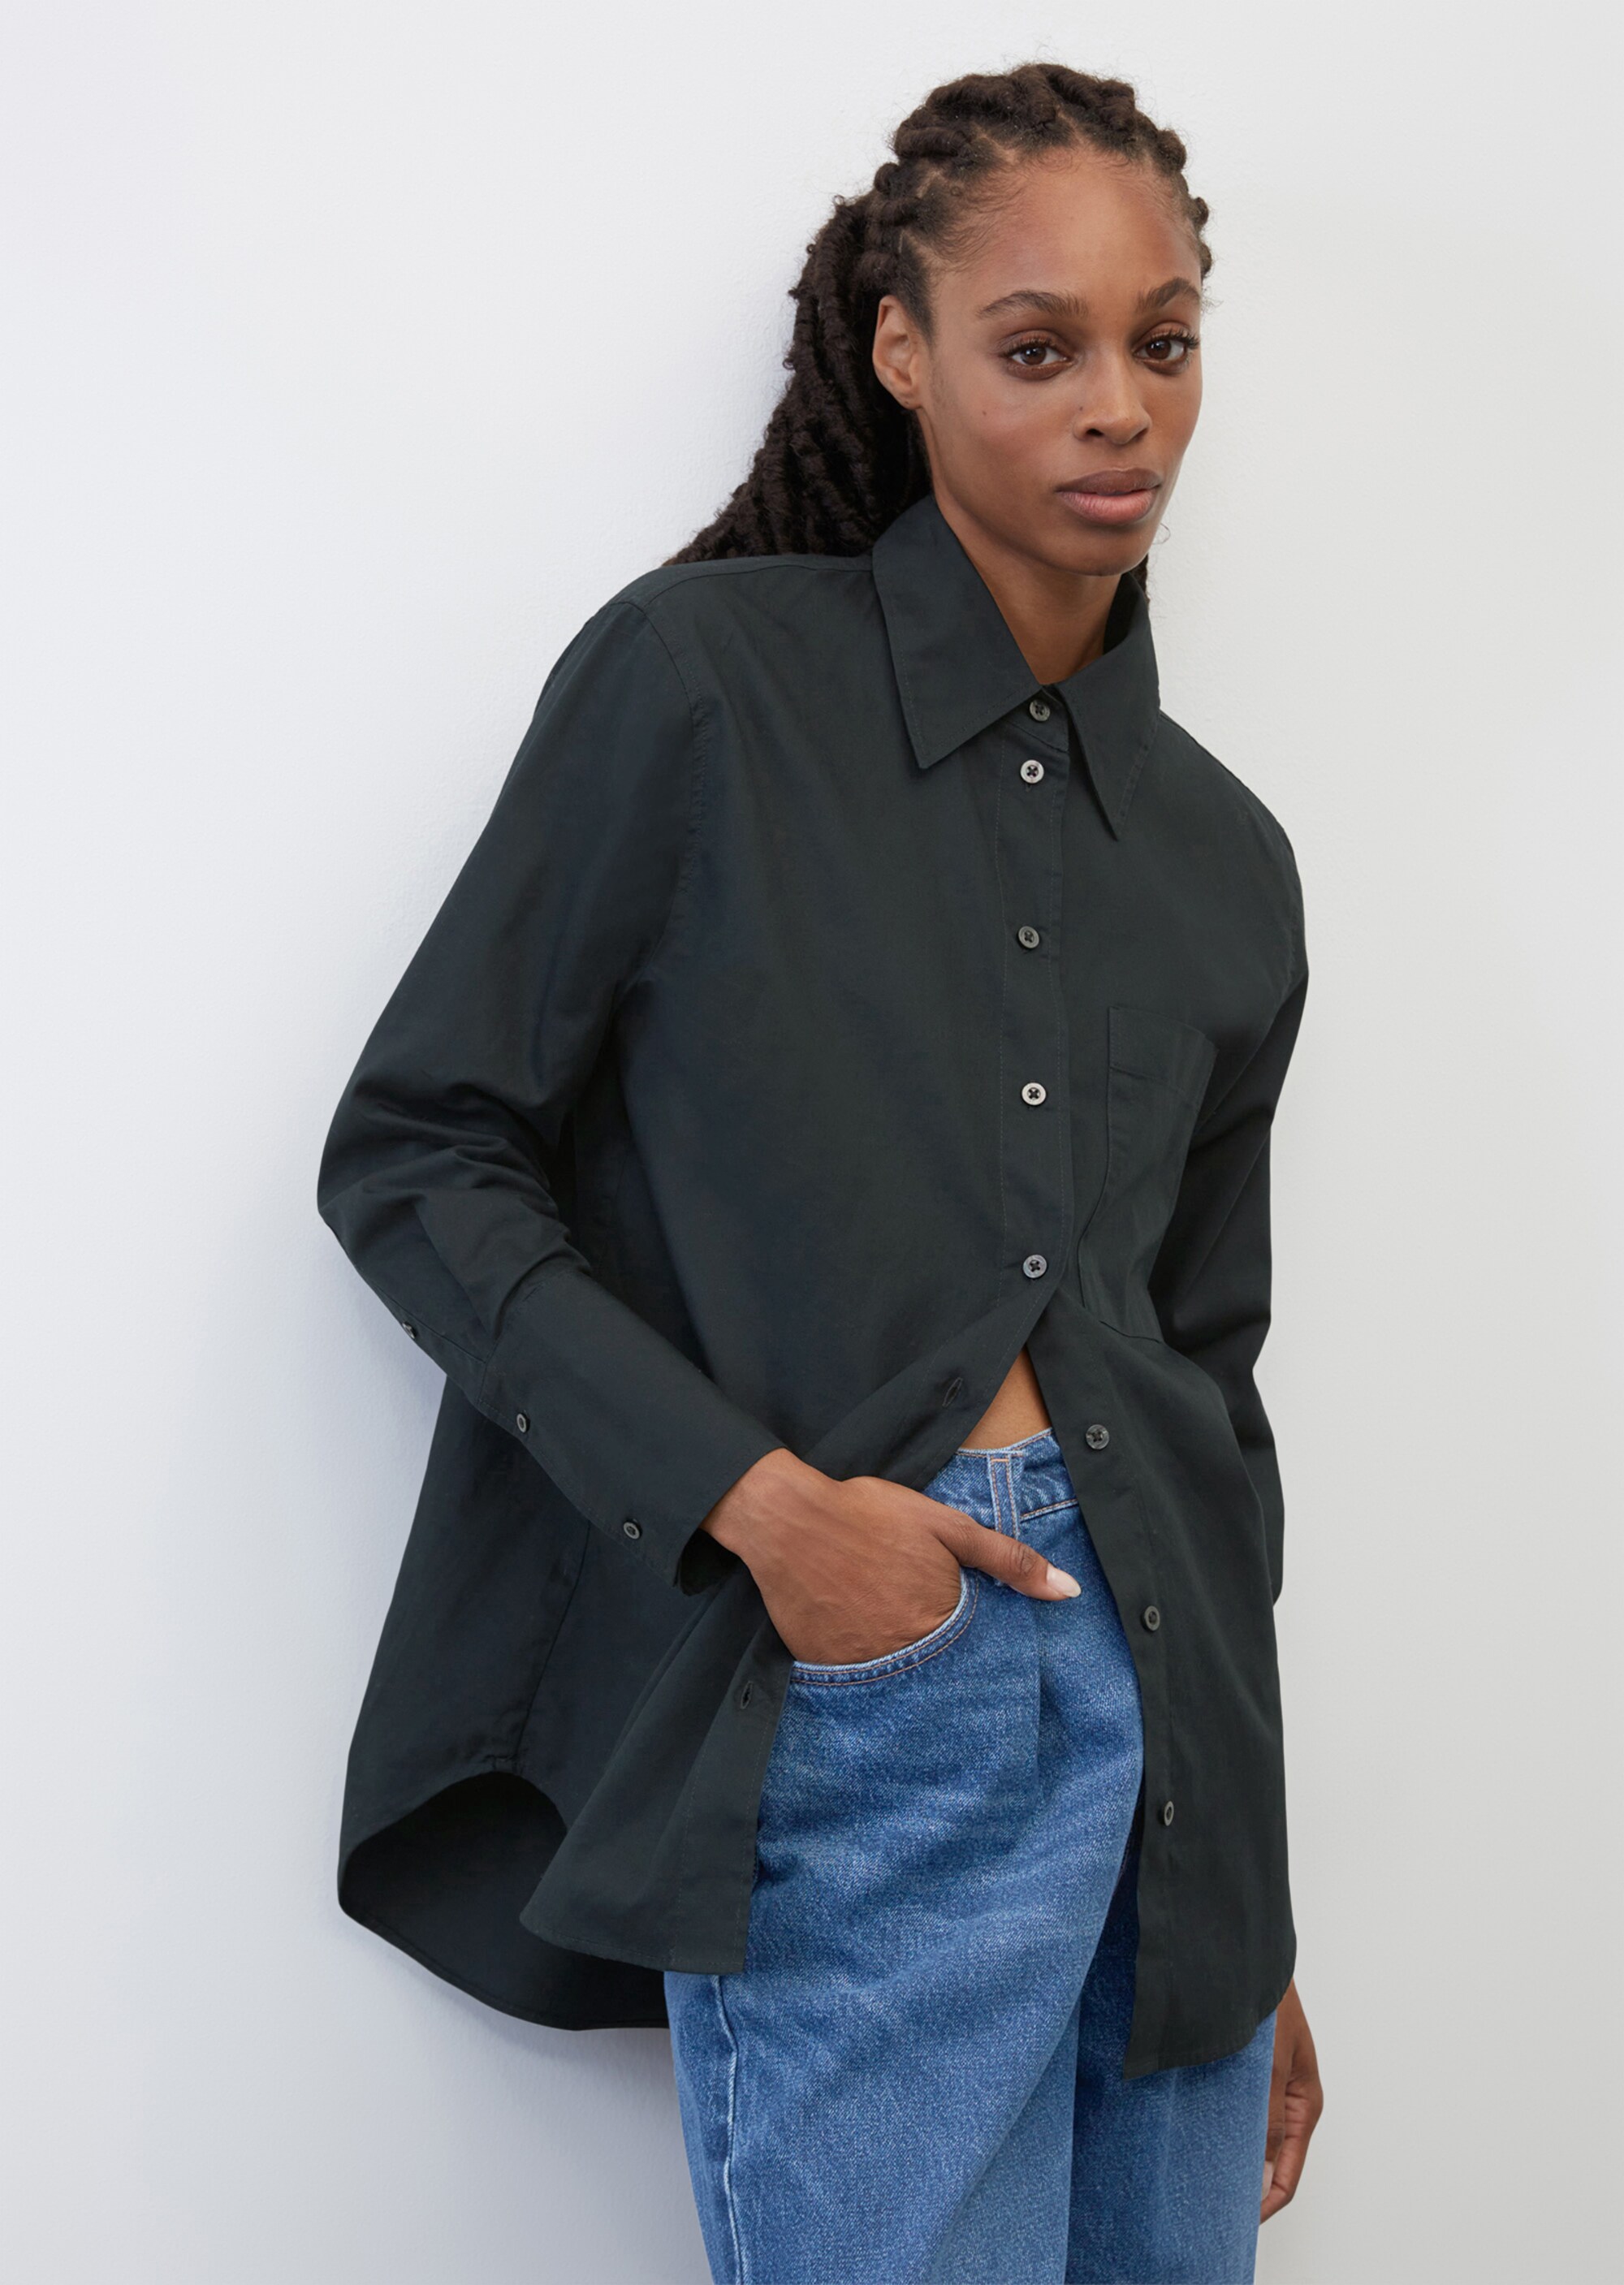 Mode Blouses Blouse-chemisiers Marc O’Polo Marc O\u2019Polo Blouse-chemisier brun-noir imprim\u00e9 allover style d\u2019affaires 